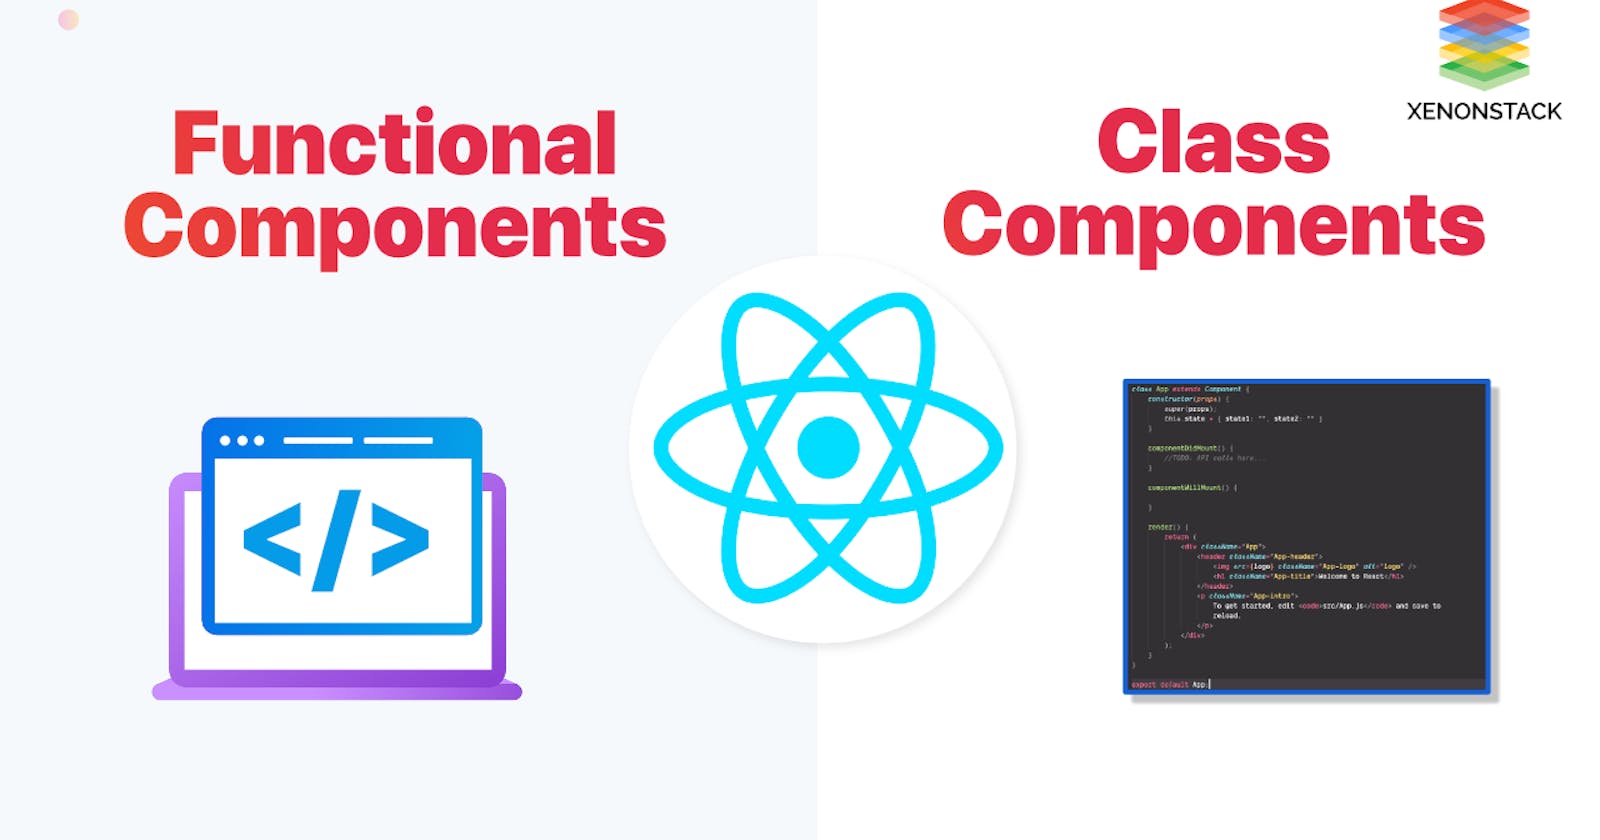 Class Components vs Functional Components